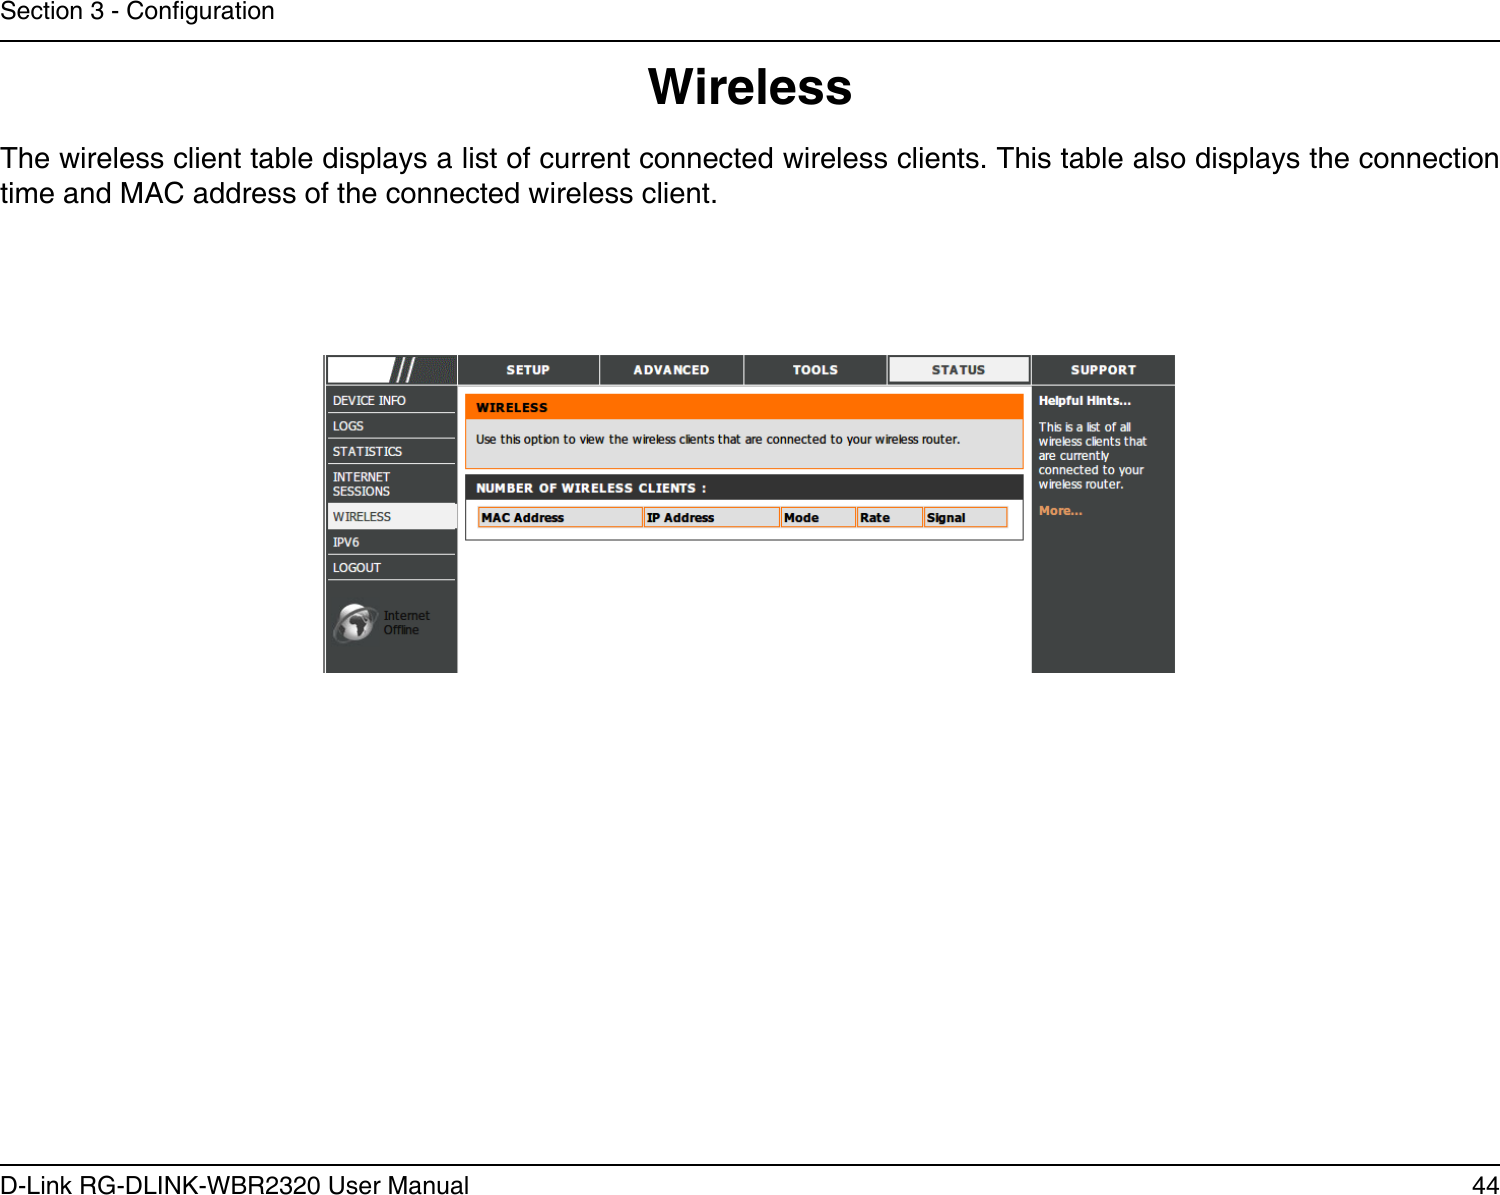 44D-Link RG-DLINK-WBR2320 User ManualSection 3 - CongurationWirelessThe wireless client table displays a list of current connected wireless clients. This table also displays the connection time and MAC address of the connected wireless client.